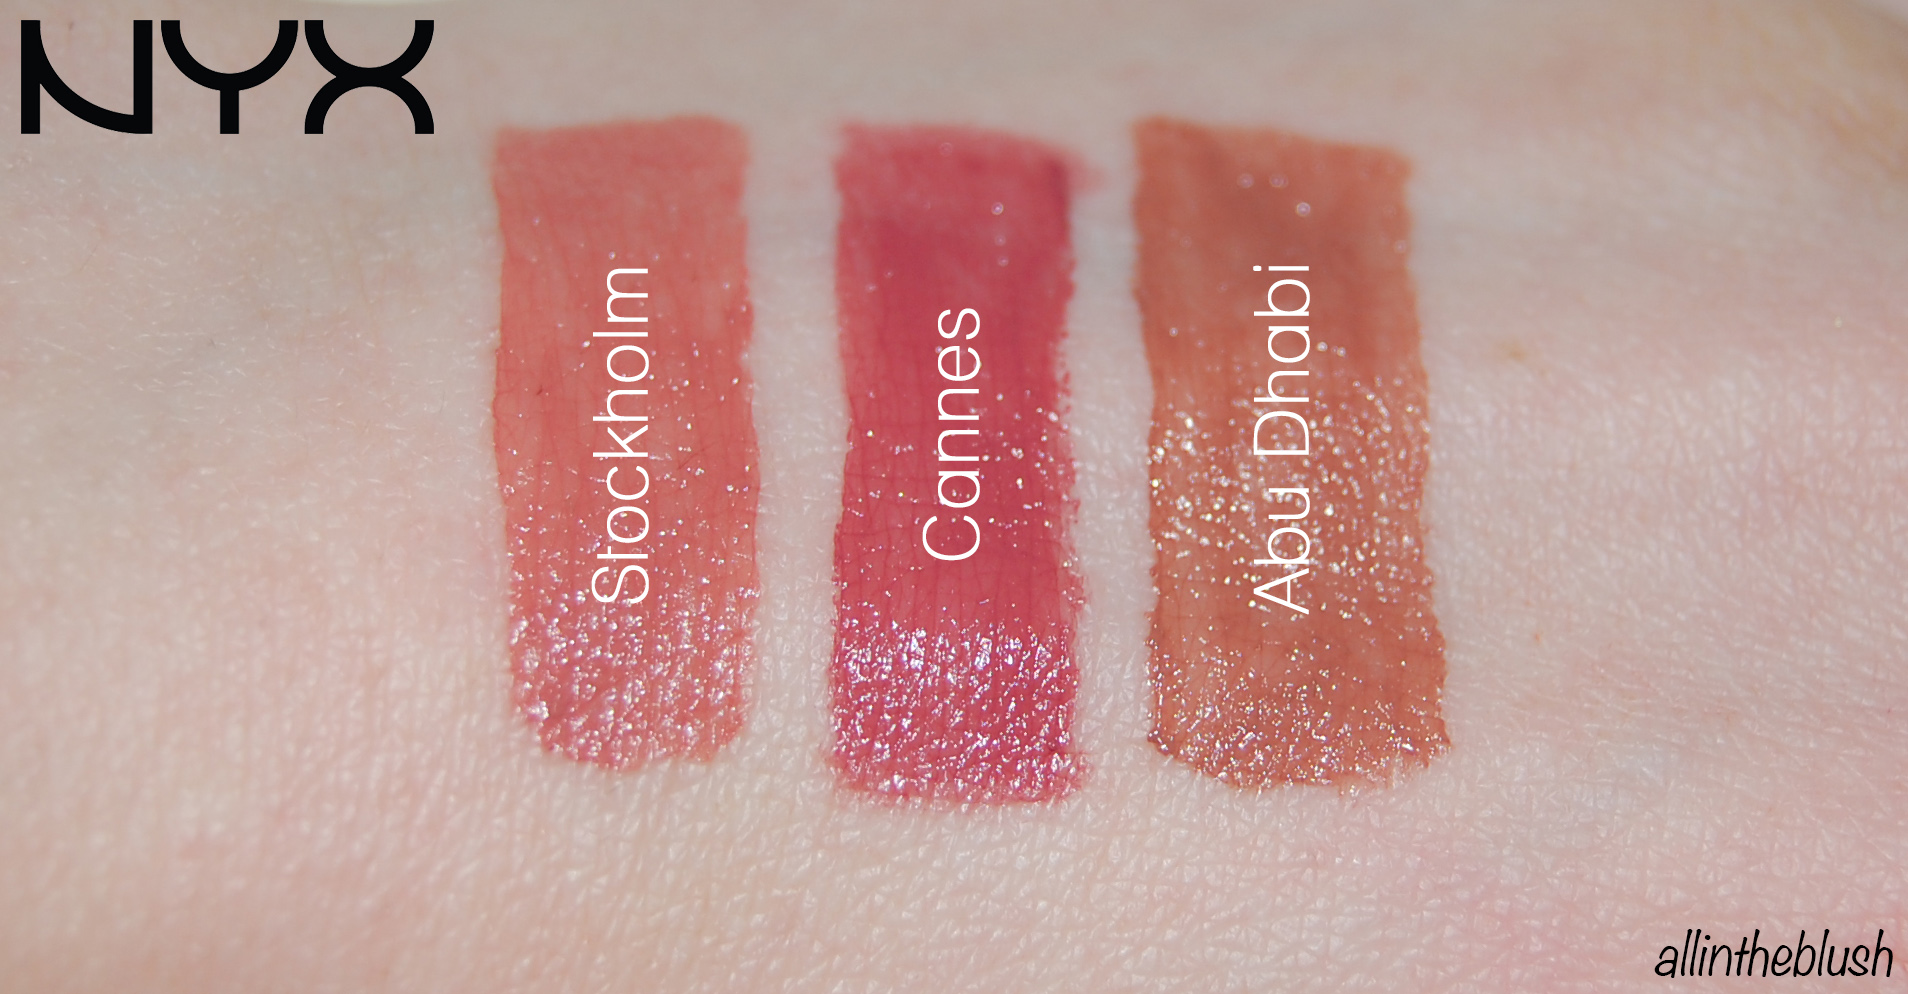 Related image of Nyx Abu Dhabi Soft Matte Lip Cream Review Swatches.